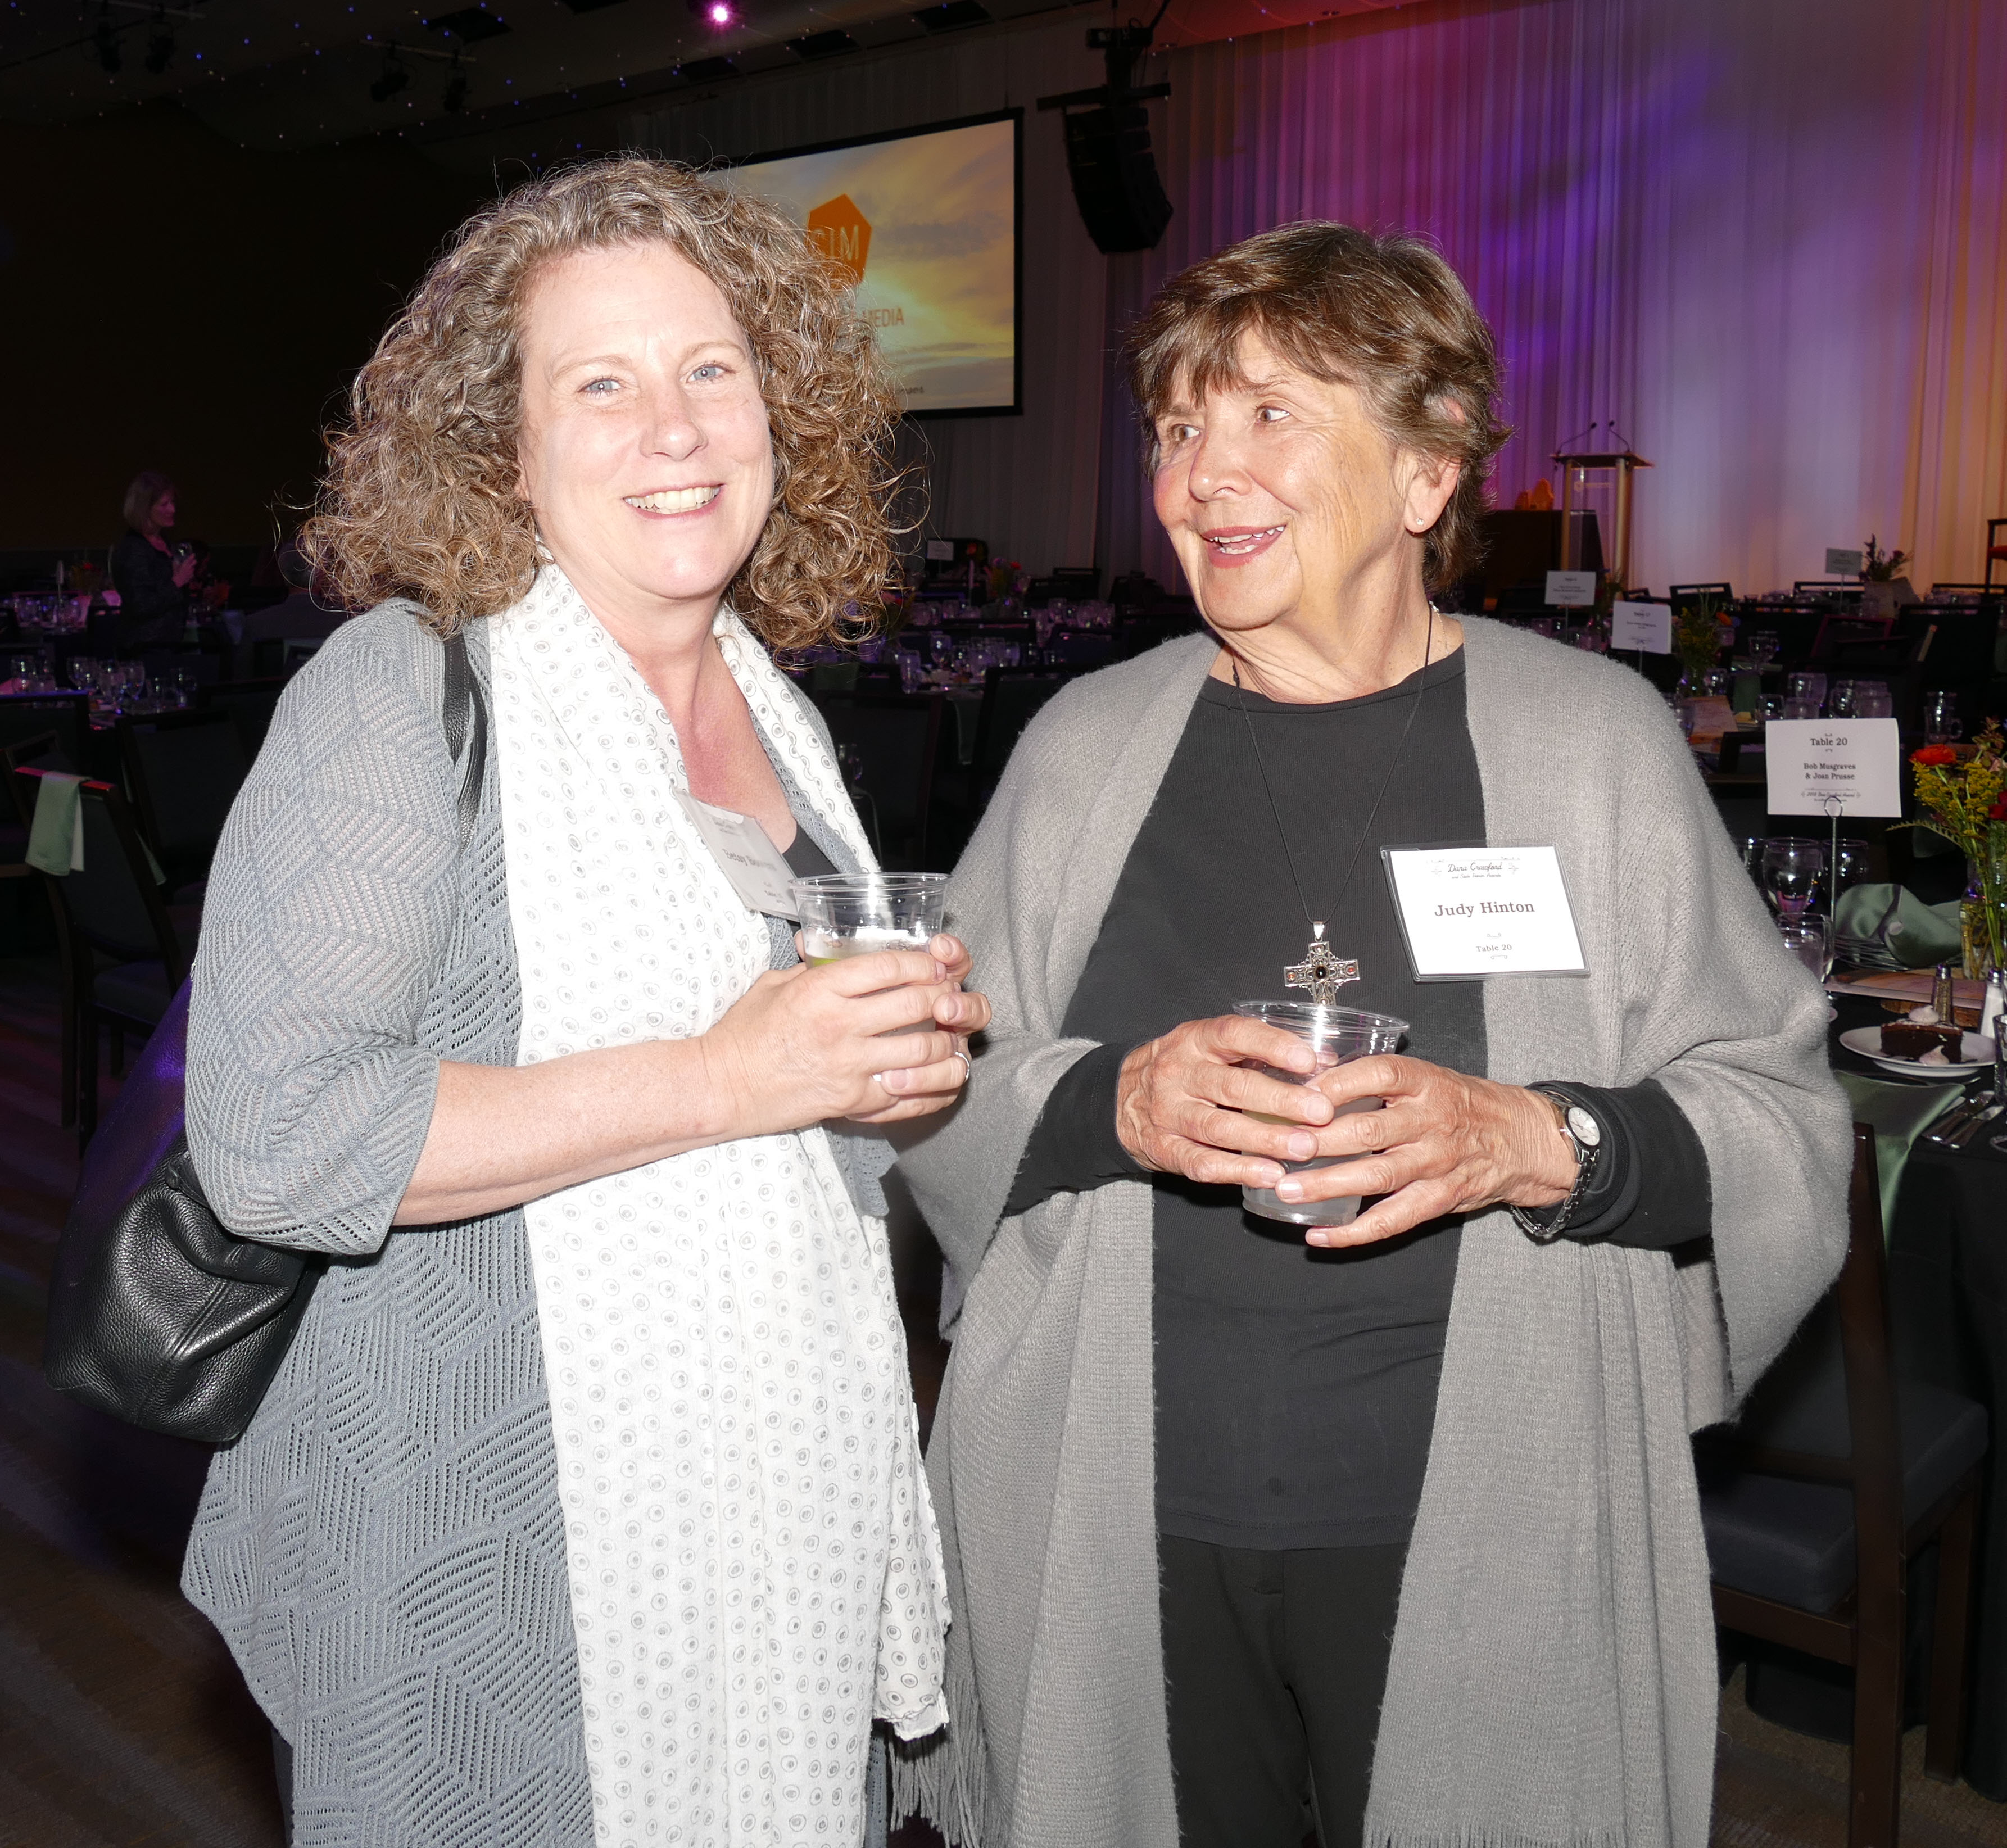 Betsy Bowers, left, and Judy Hinton